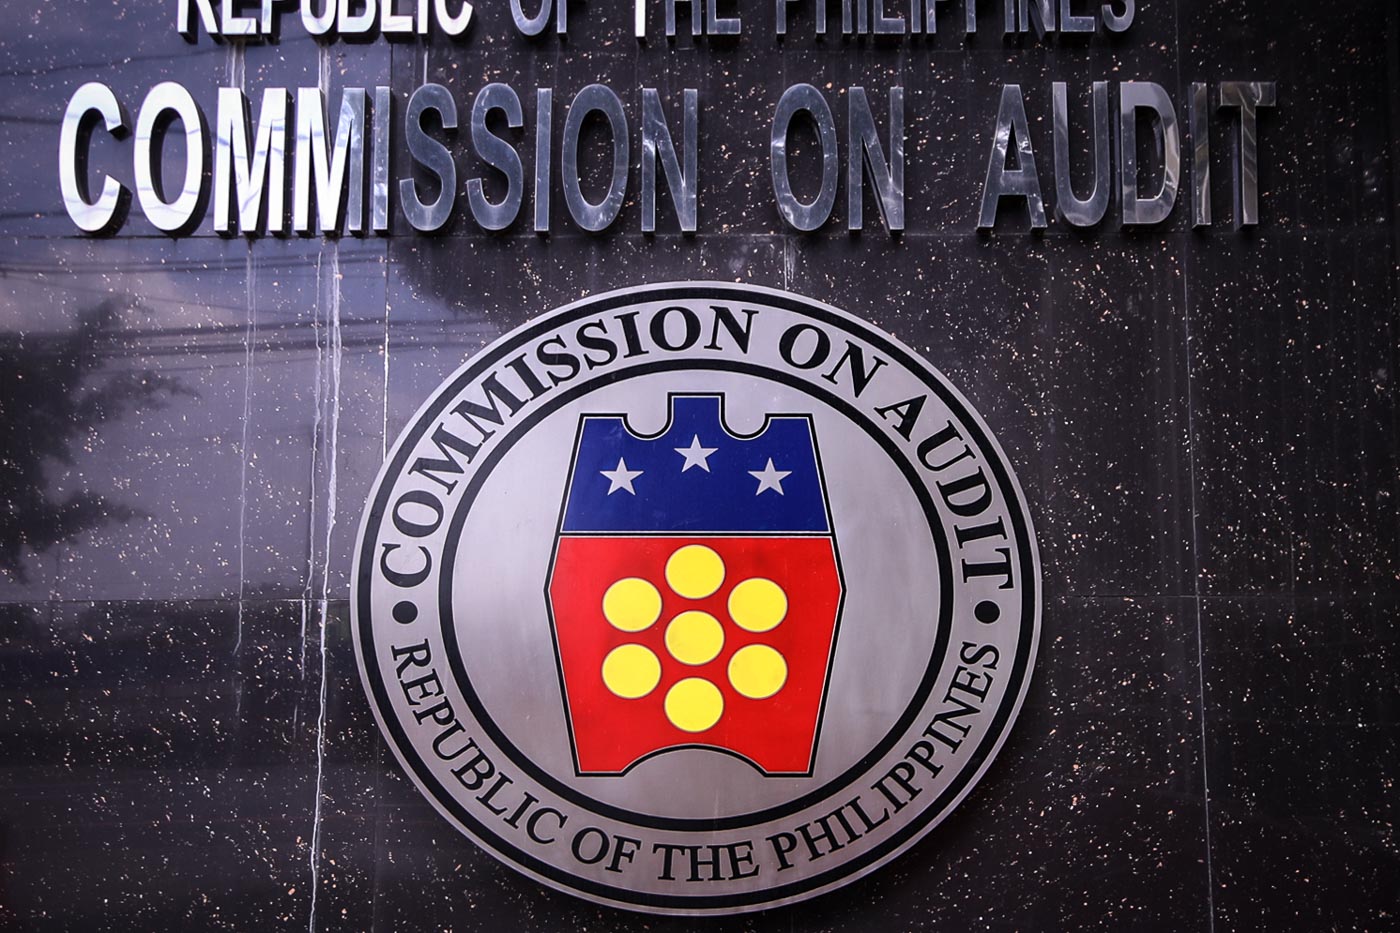 DISALLOWANCE. The Commission on Audit (COA) is hearing an appeal of a P36 million disallowance against the Tacloban City local government. Photo by Darren Langit/Rappler 